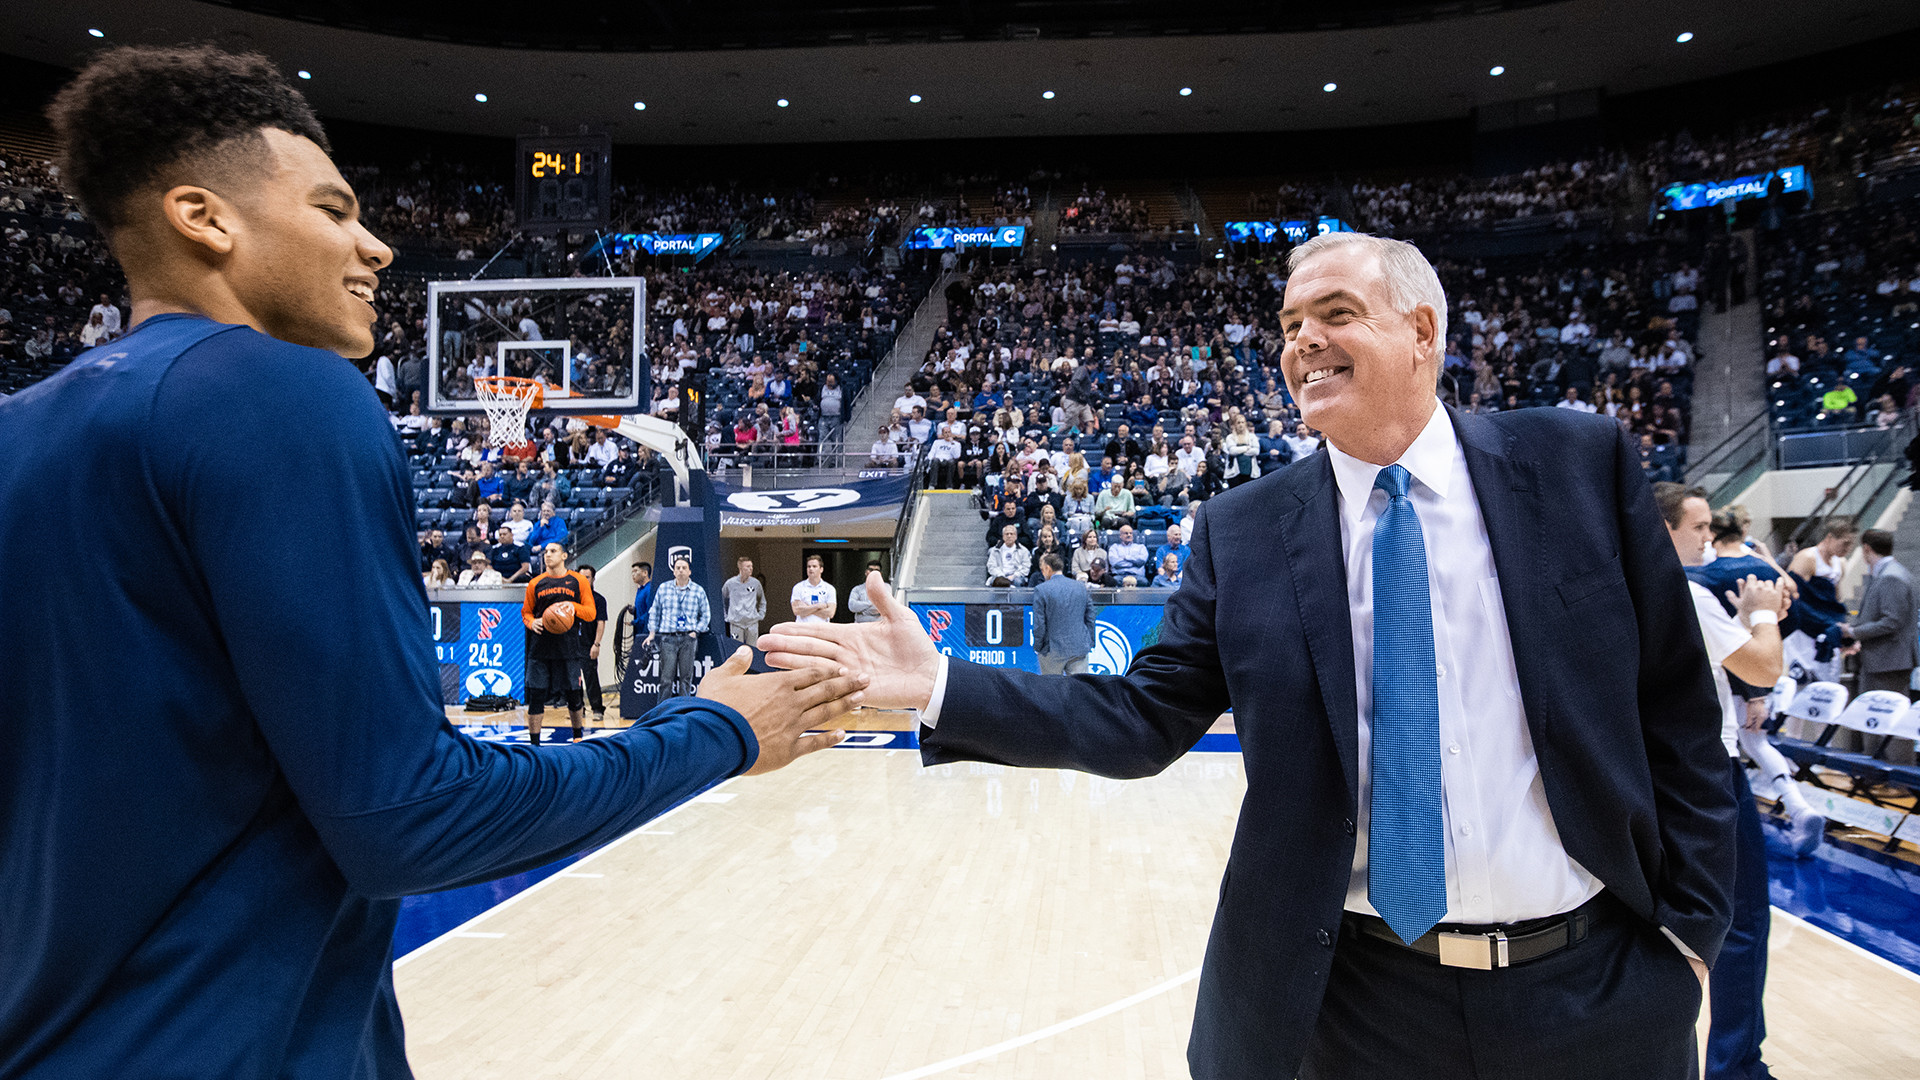 Dave Rose to be Inducted into Utah Sports activities Corridor of Fame, Introduced by BYU Athletics